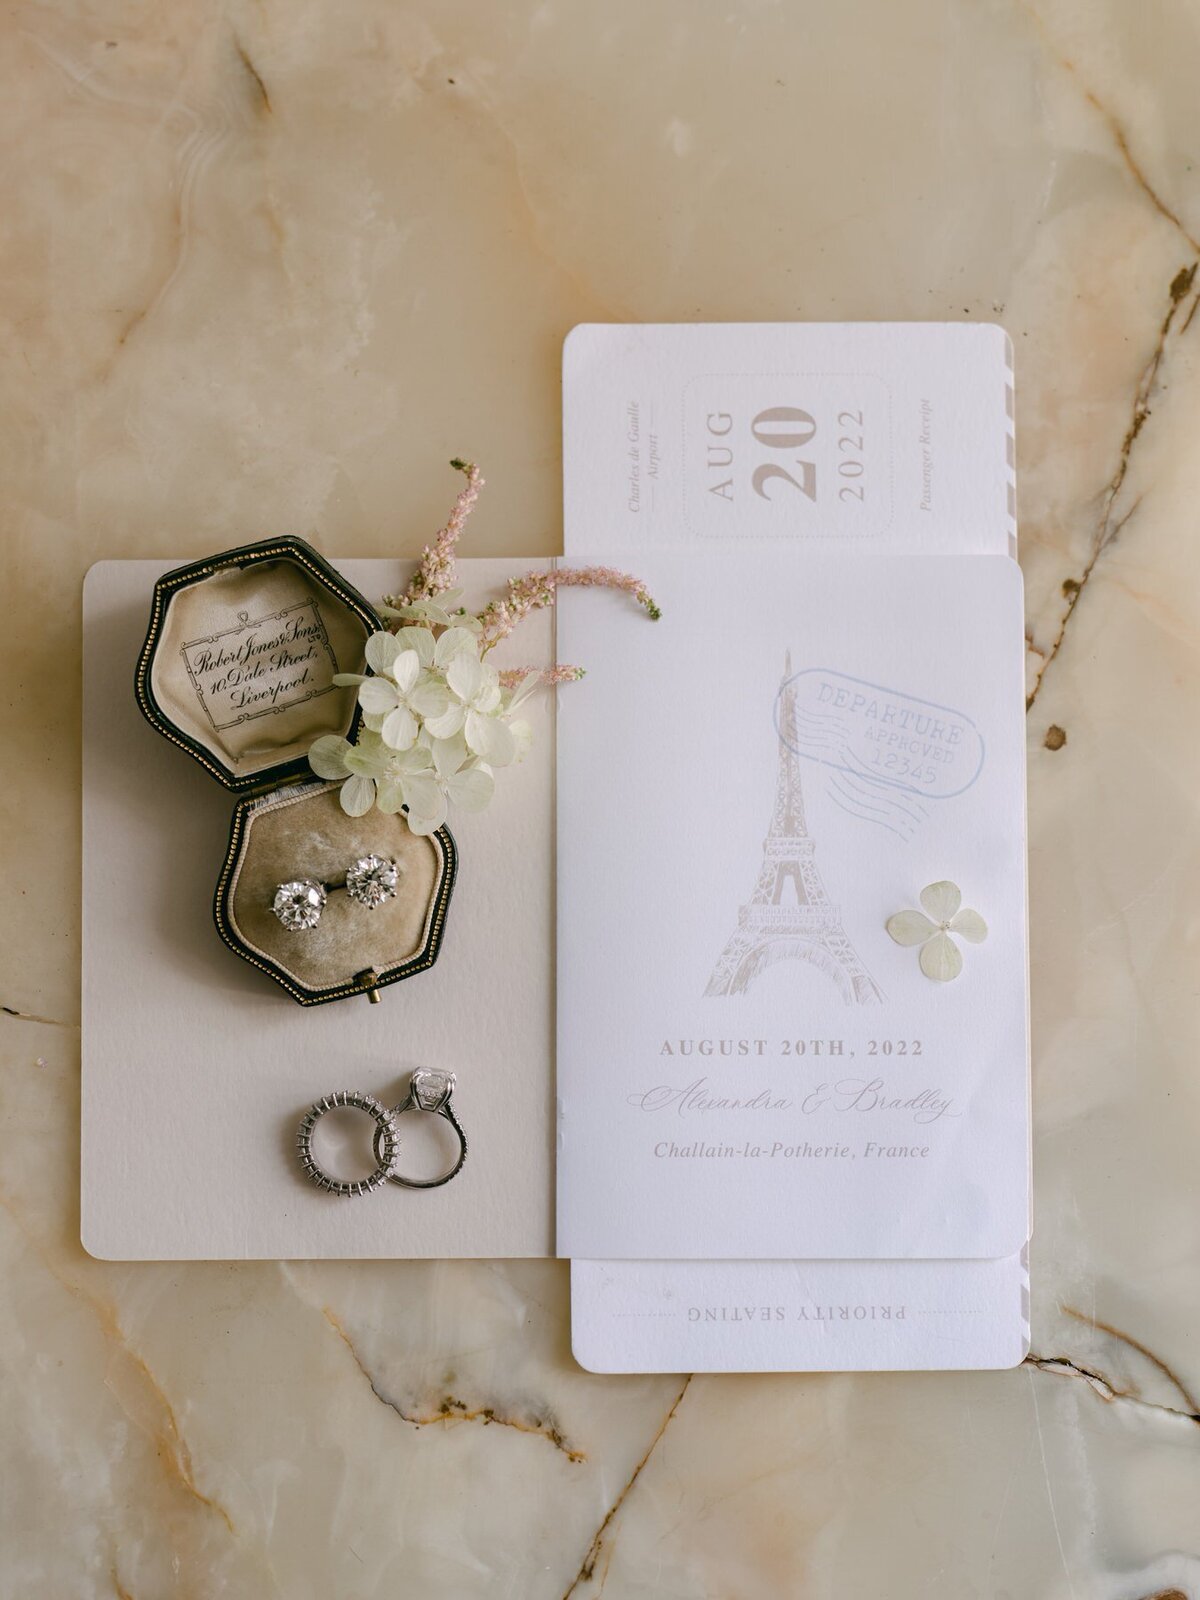 Serenity Photography - Wedding in France chateau 24